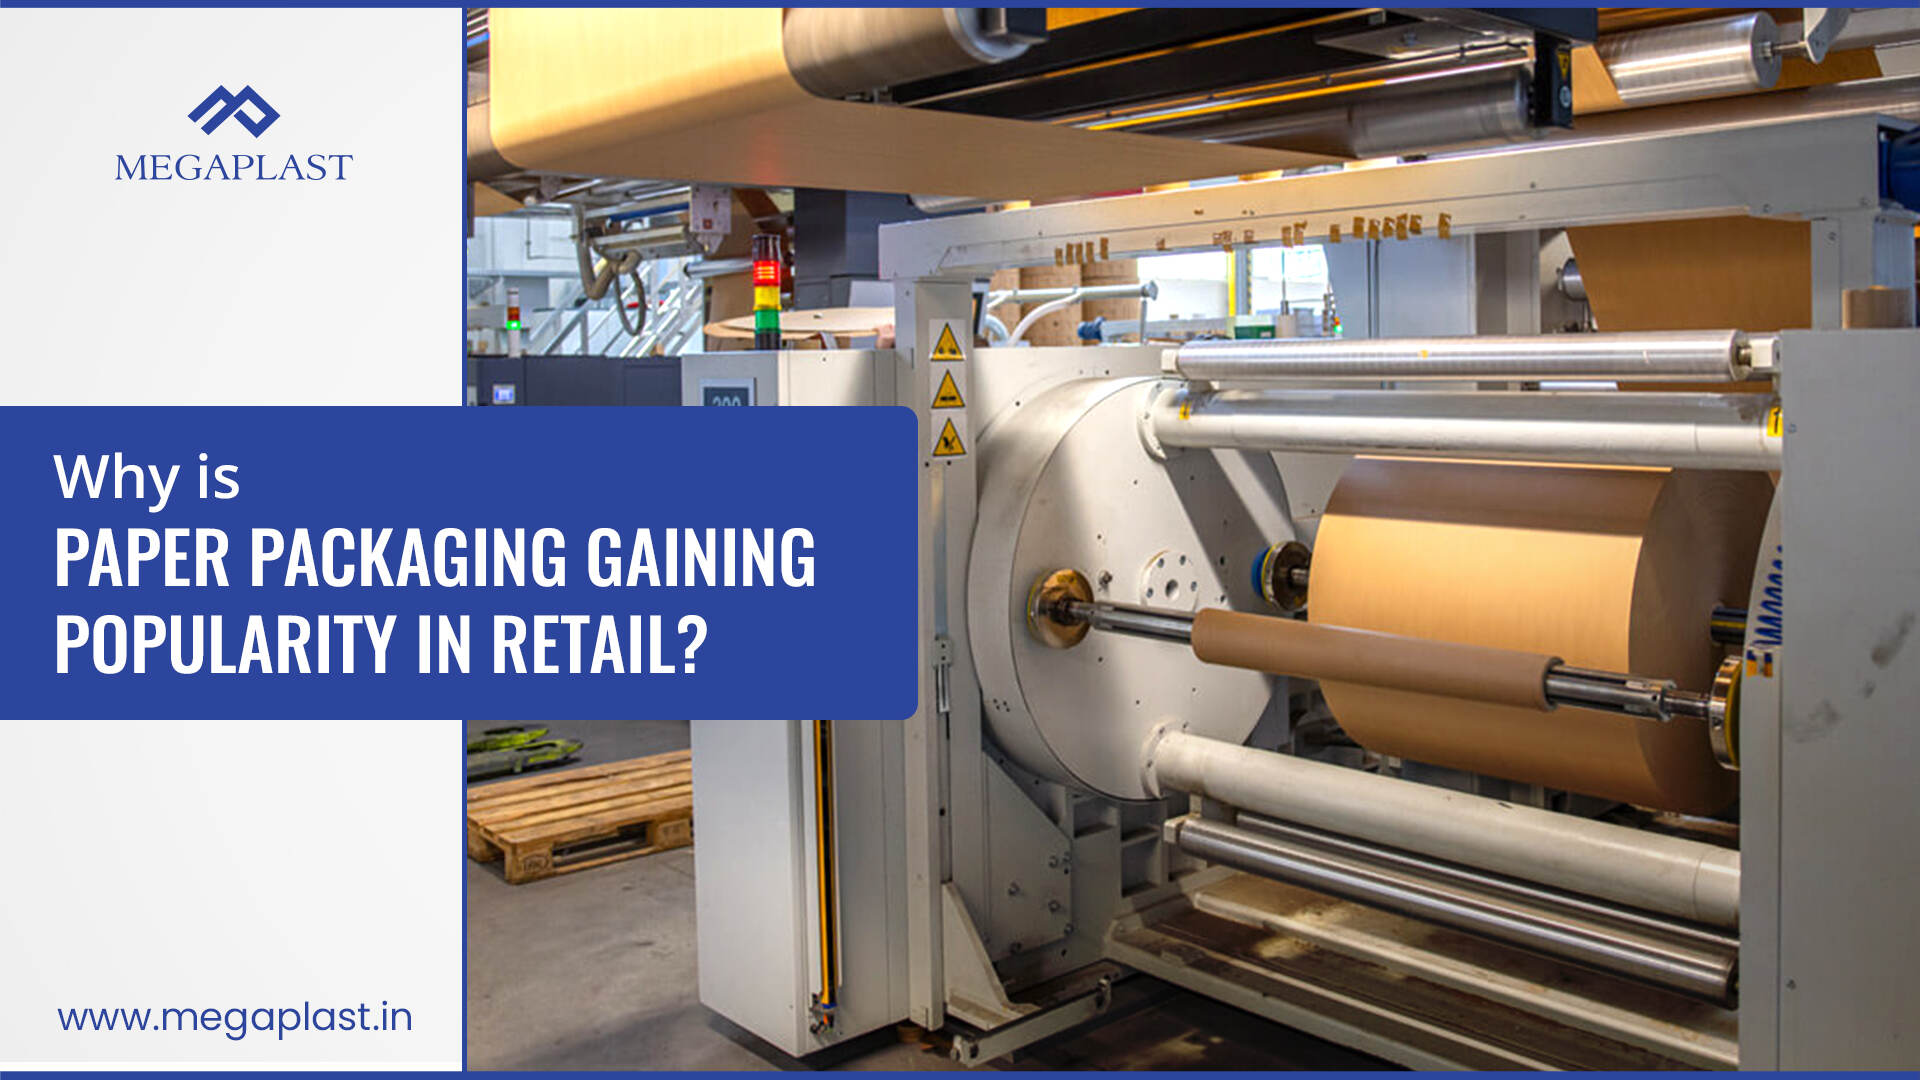 Why is Paper Packaging gaining popularity in retail?